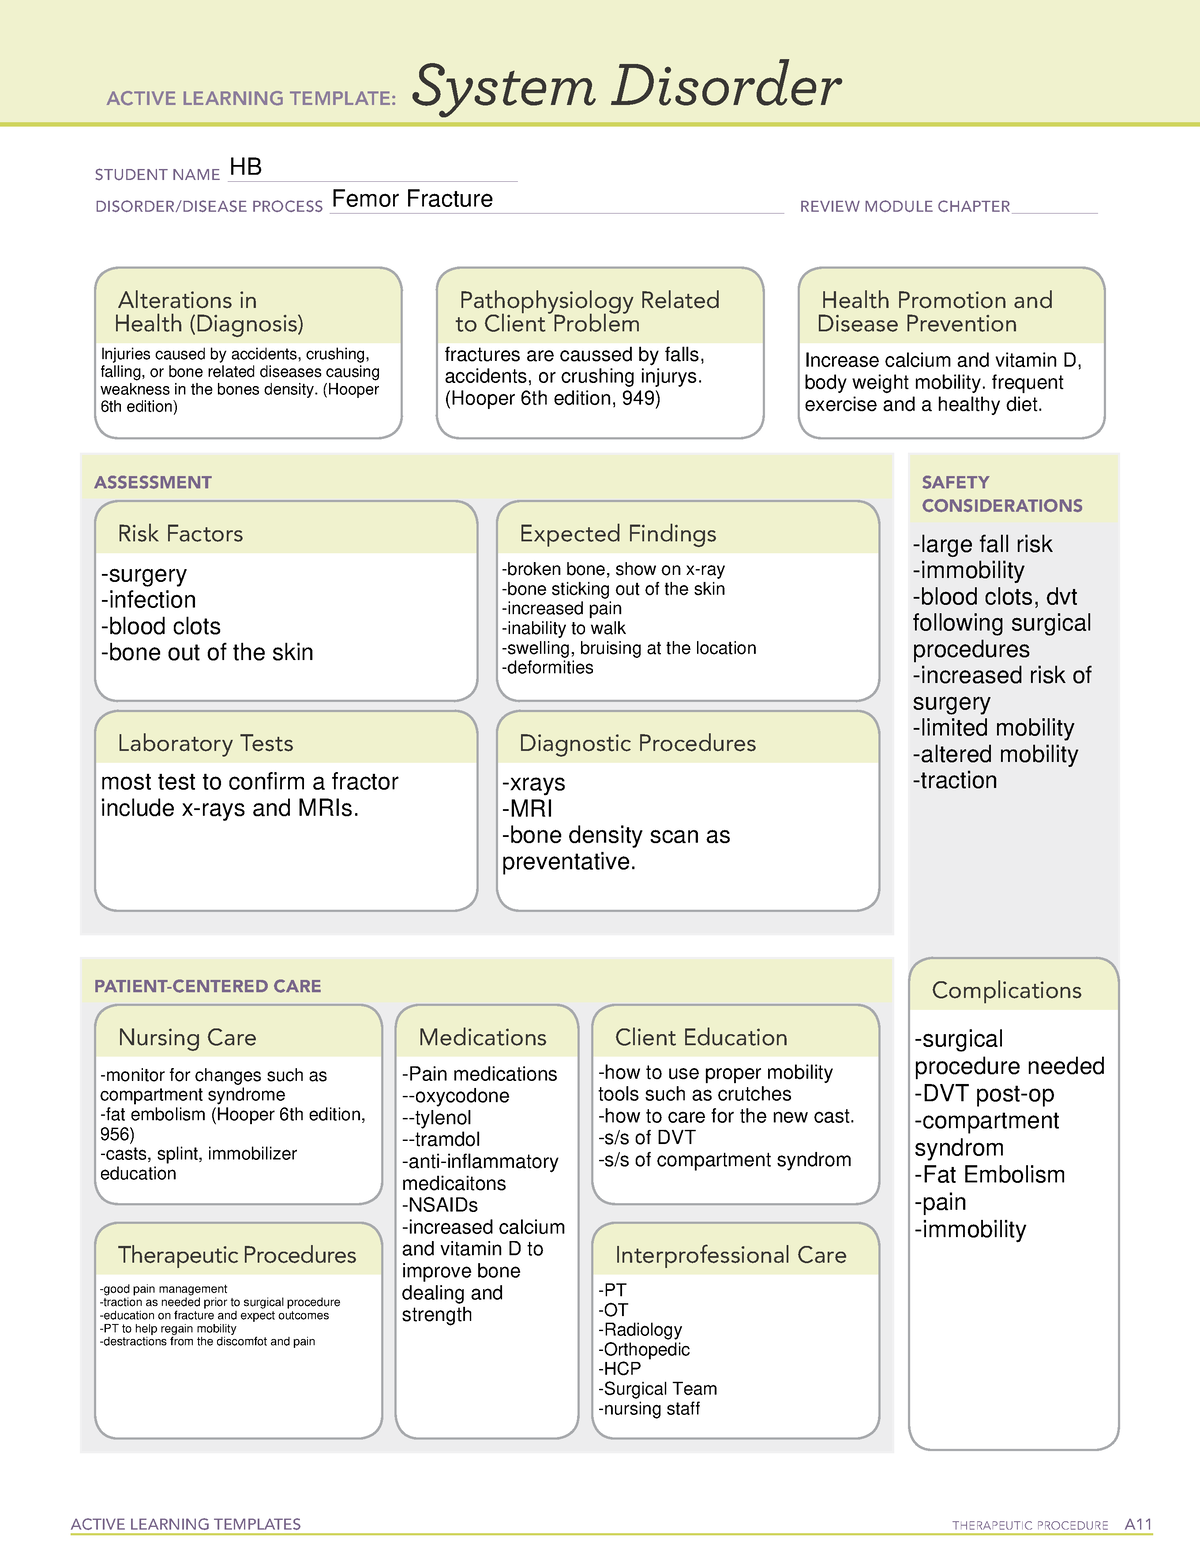 ATI Systems disorder Fracture template - ACTIVE LEARNING TEMPLATES ...